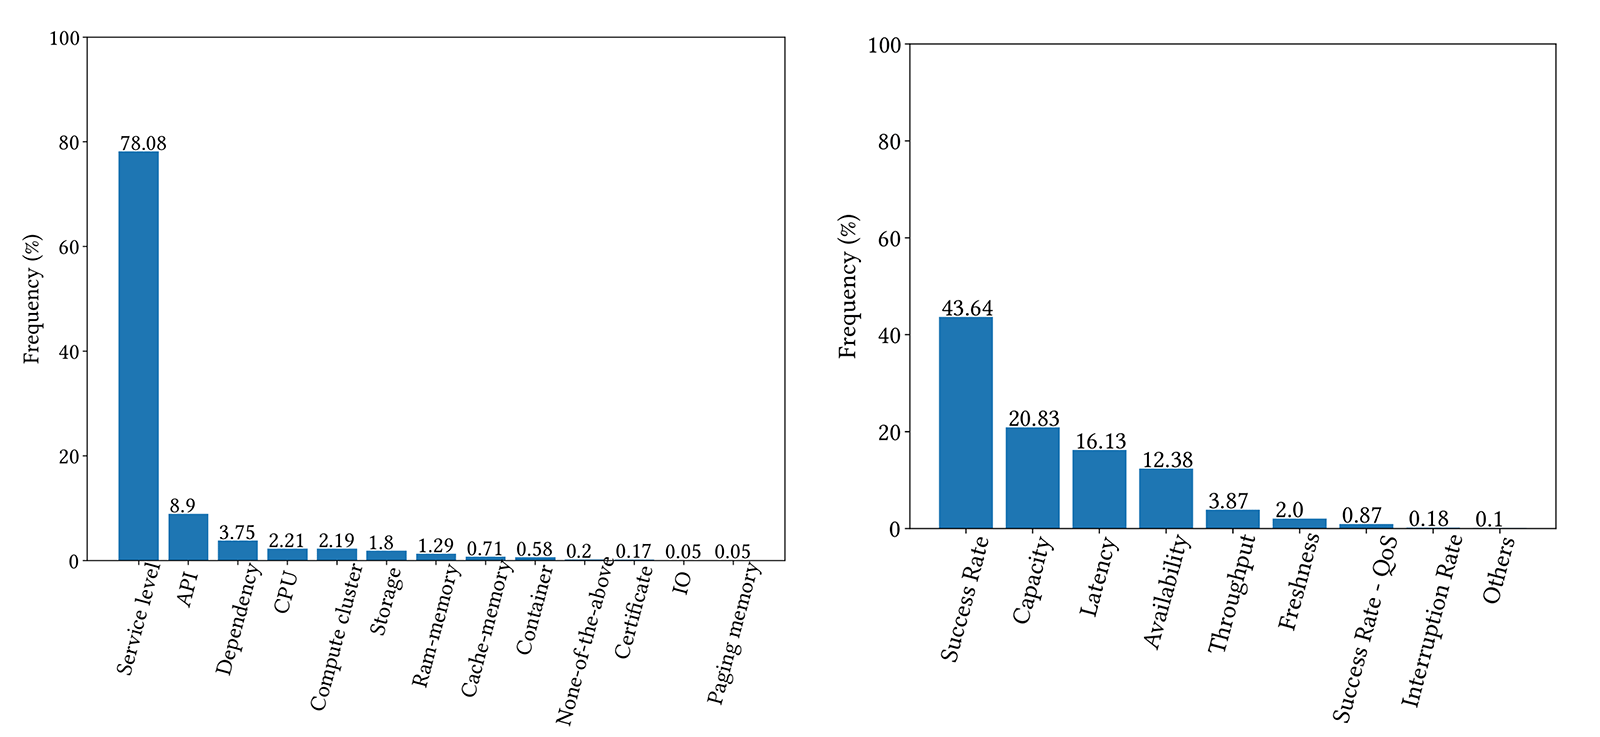 On the left is a bar chart showing the breakdown of resource classes at monitor level. On the right is a bar chart showing the breakdown of SLO classes at monitor level. 